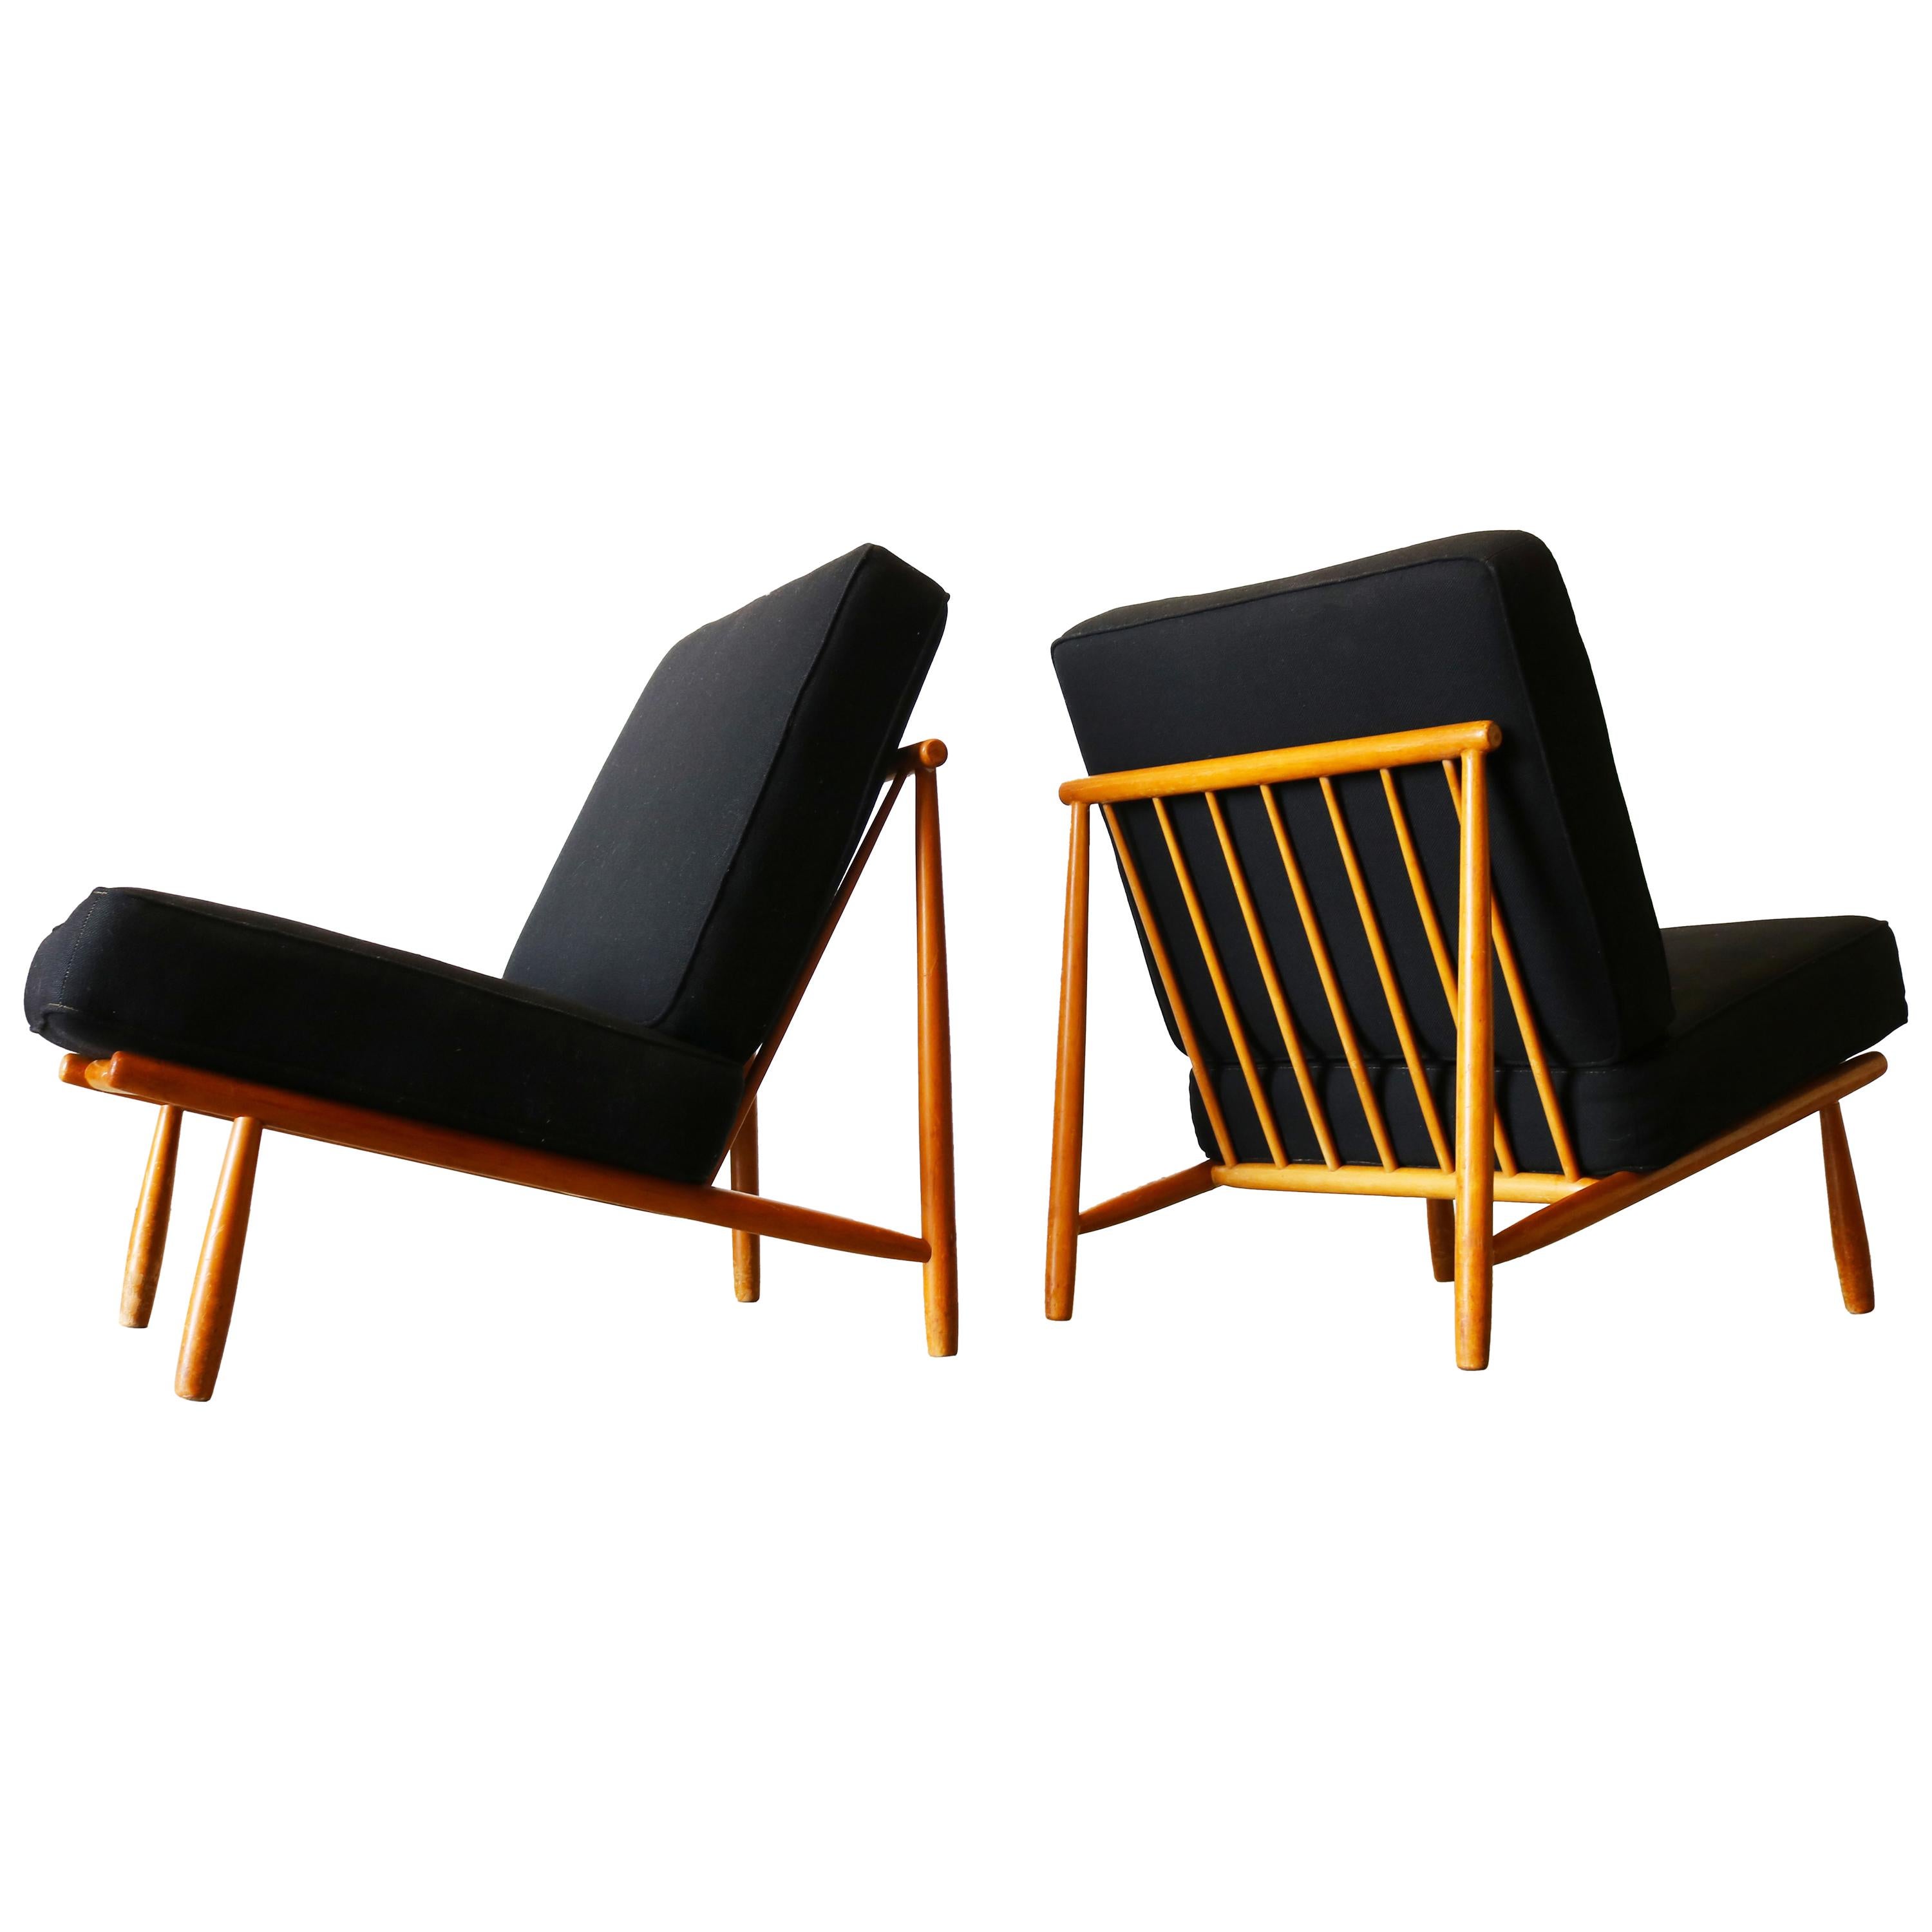 Pair of Swedish "Domus 1" Lounge Chairs by Alf Svensson for DUX Minimalist Black